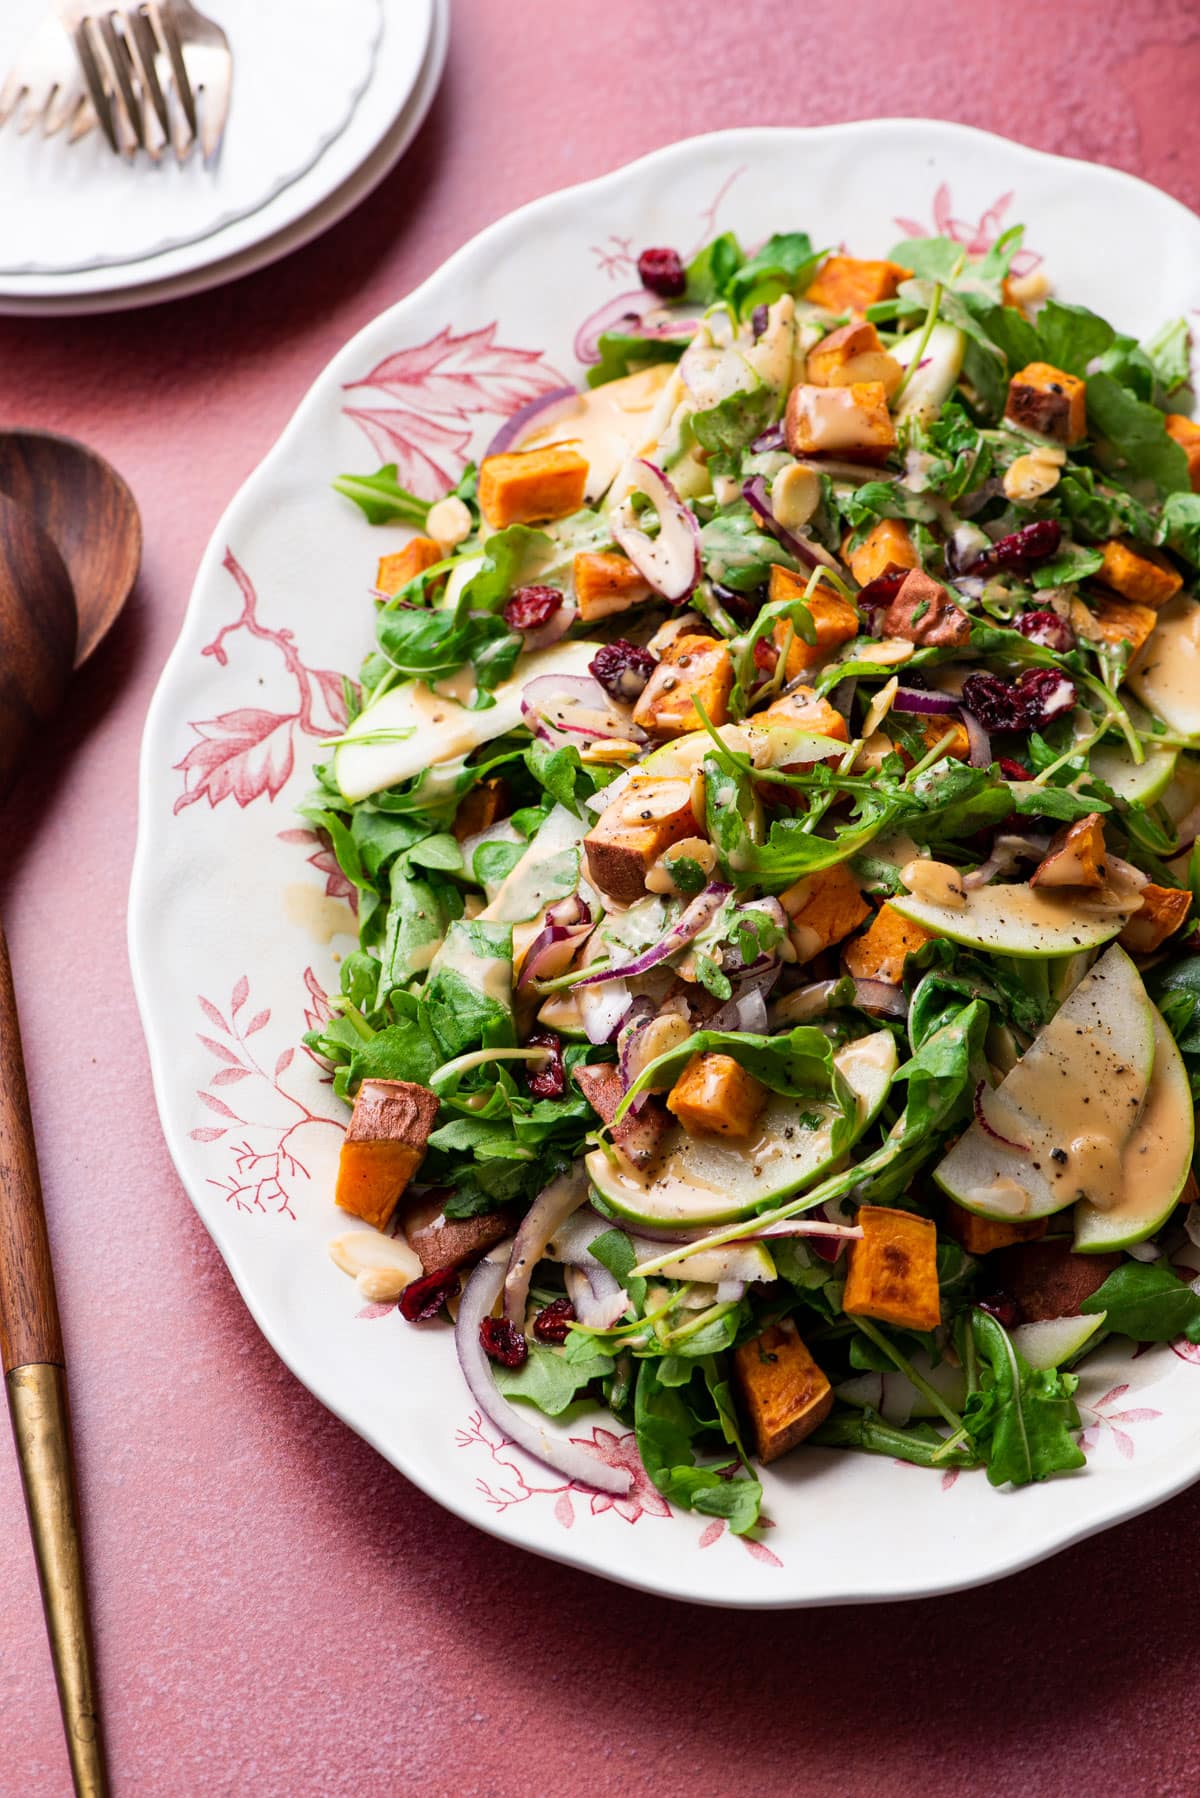 Arugula salad with sweet potatoes, apple, red onion, and cranberries.